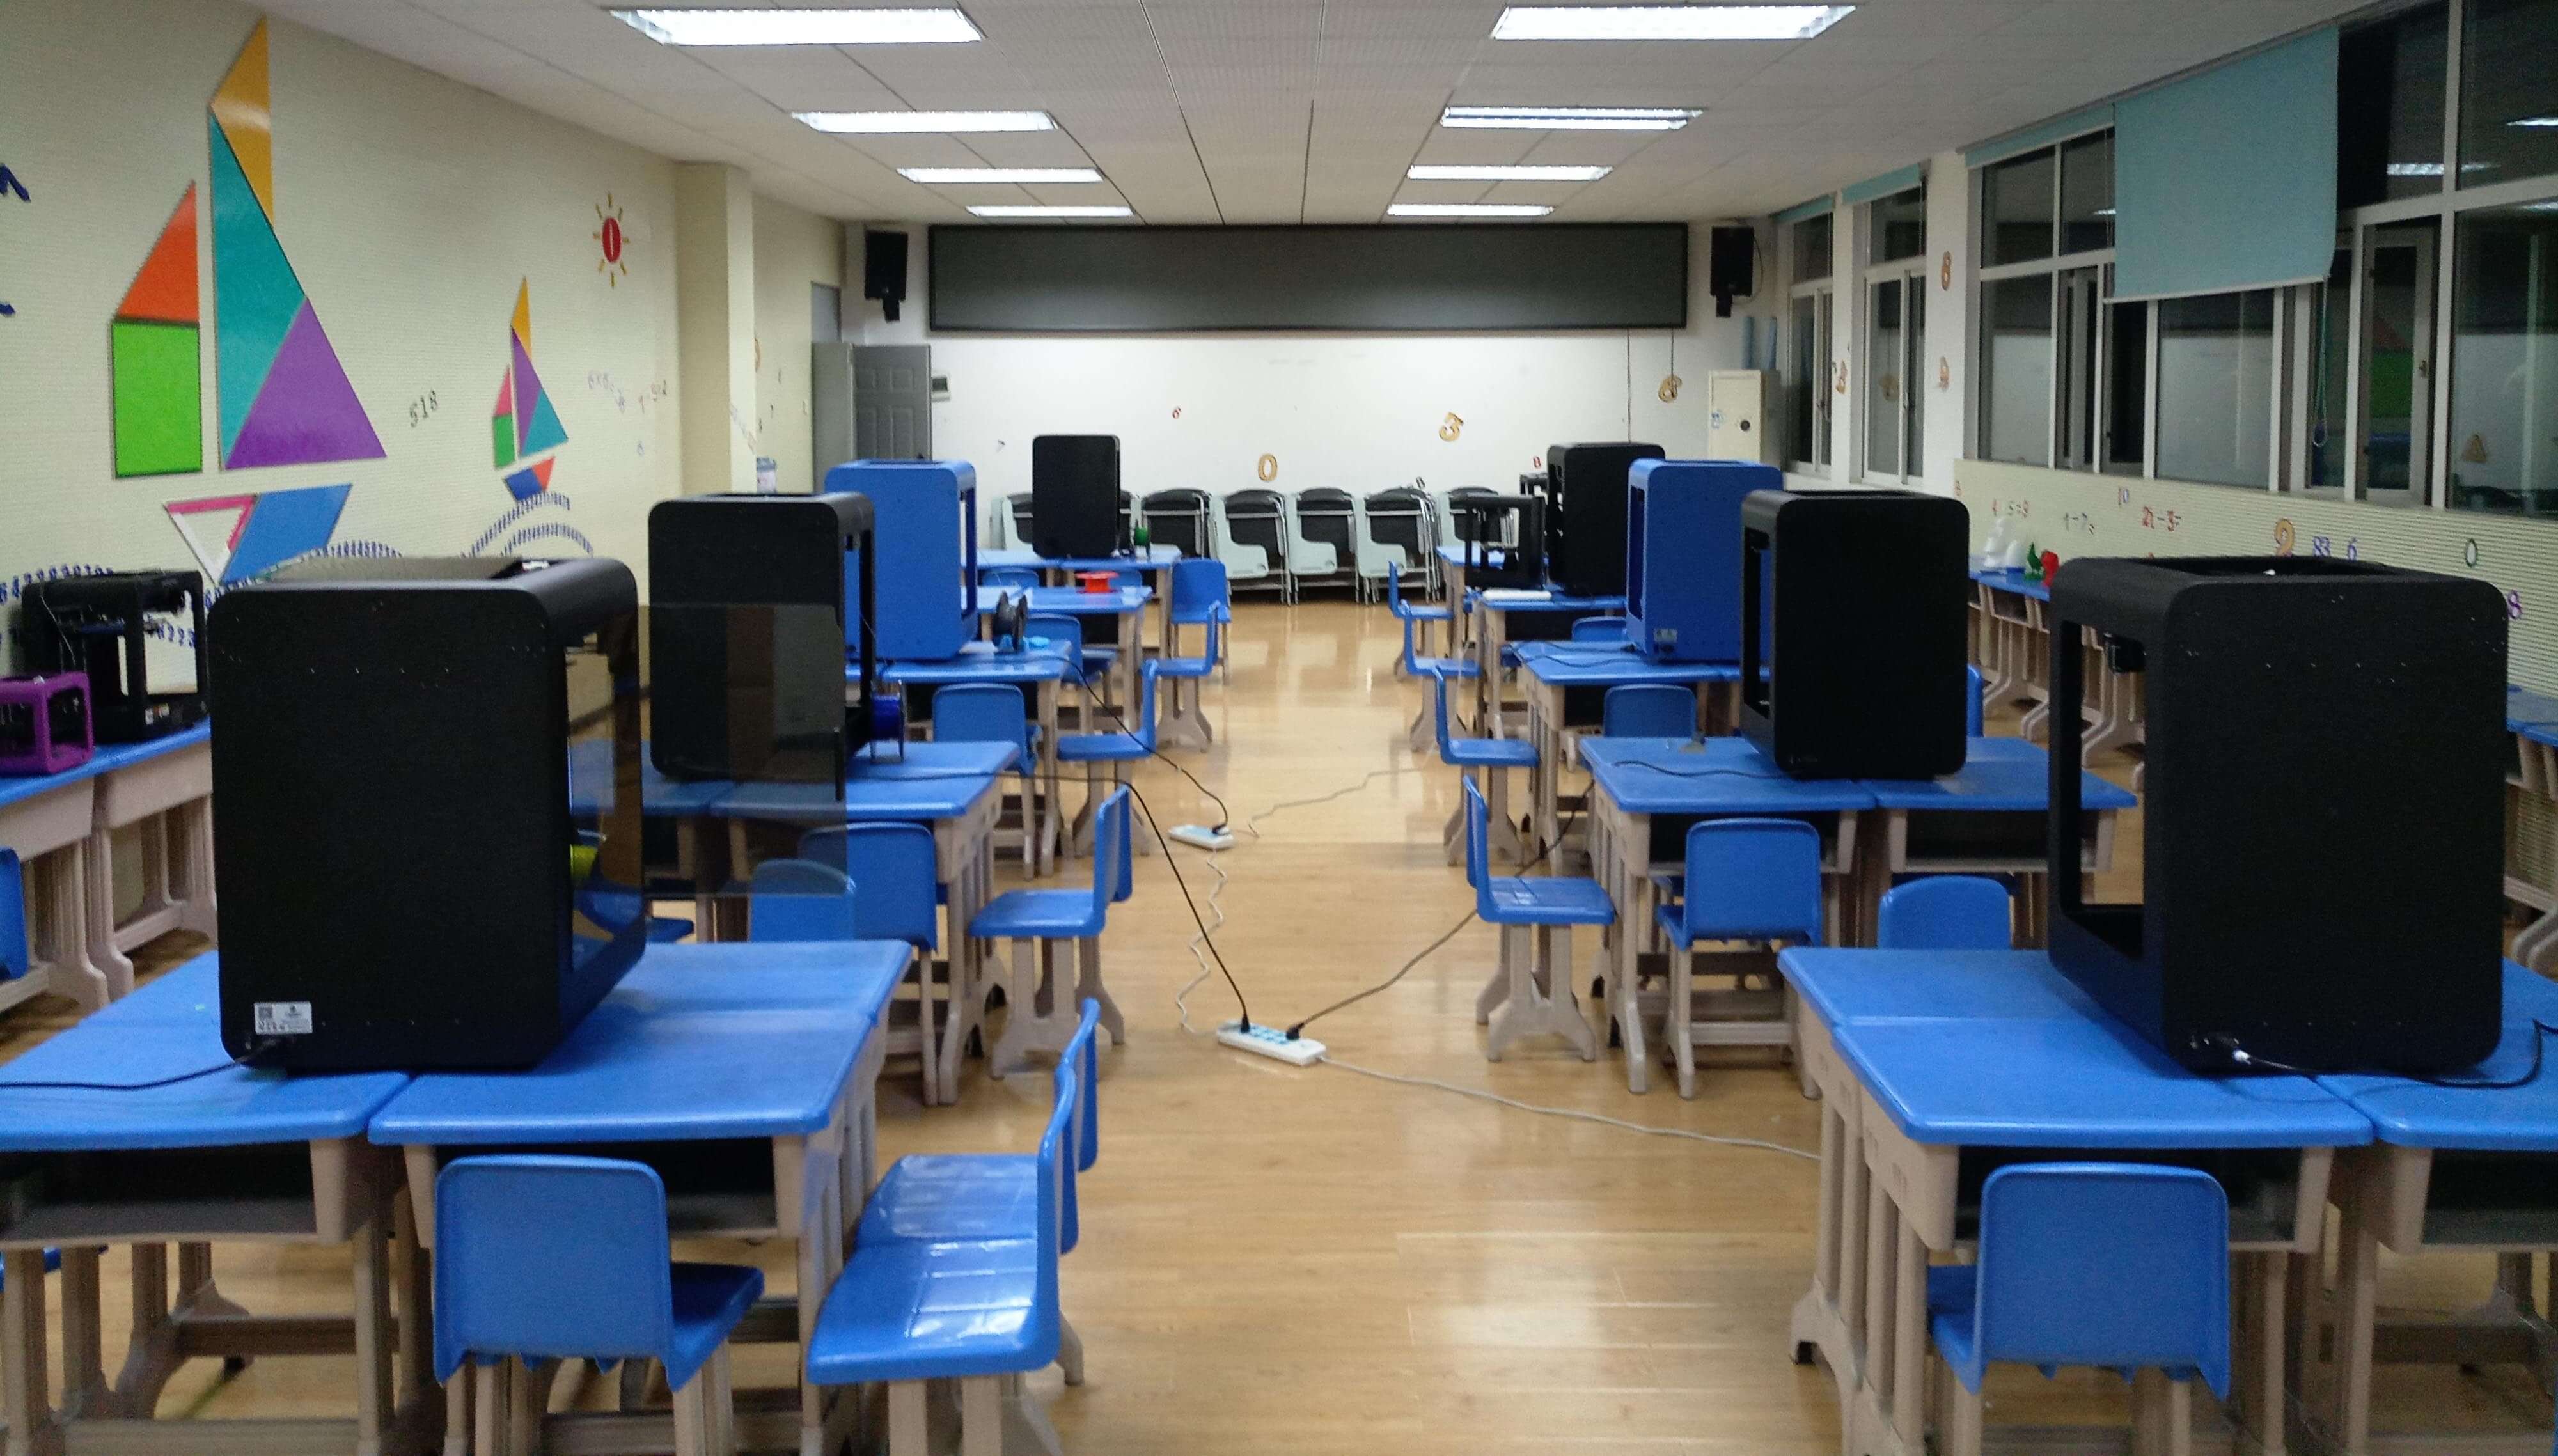 How to Build a 3D Printing Classroom in School